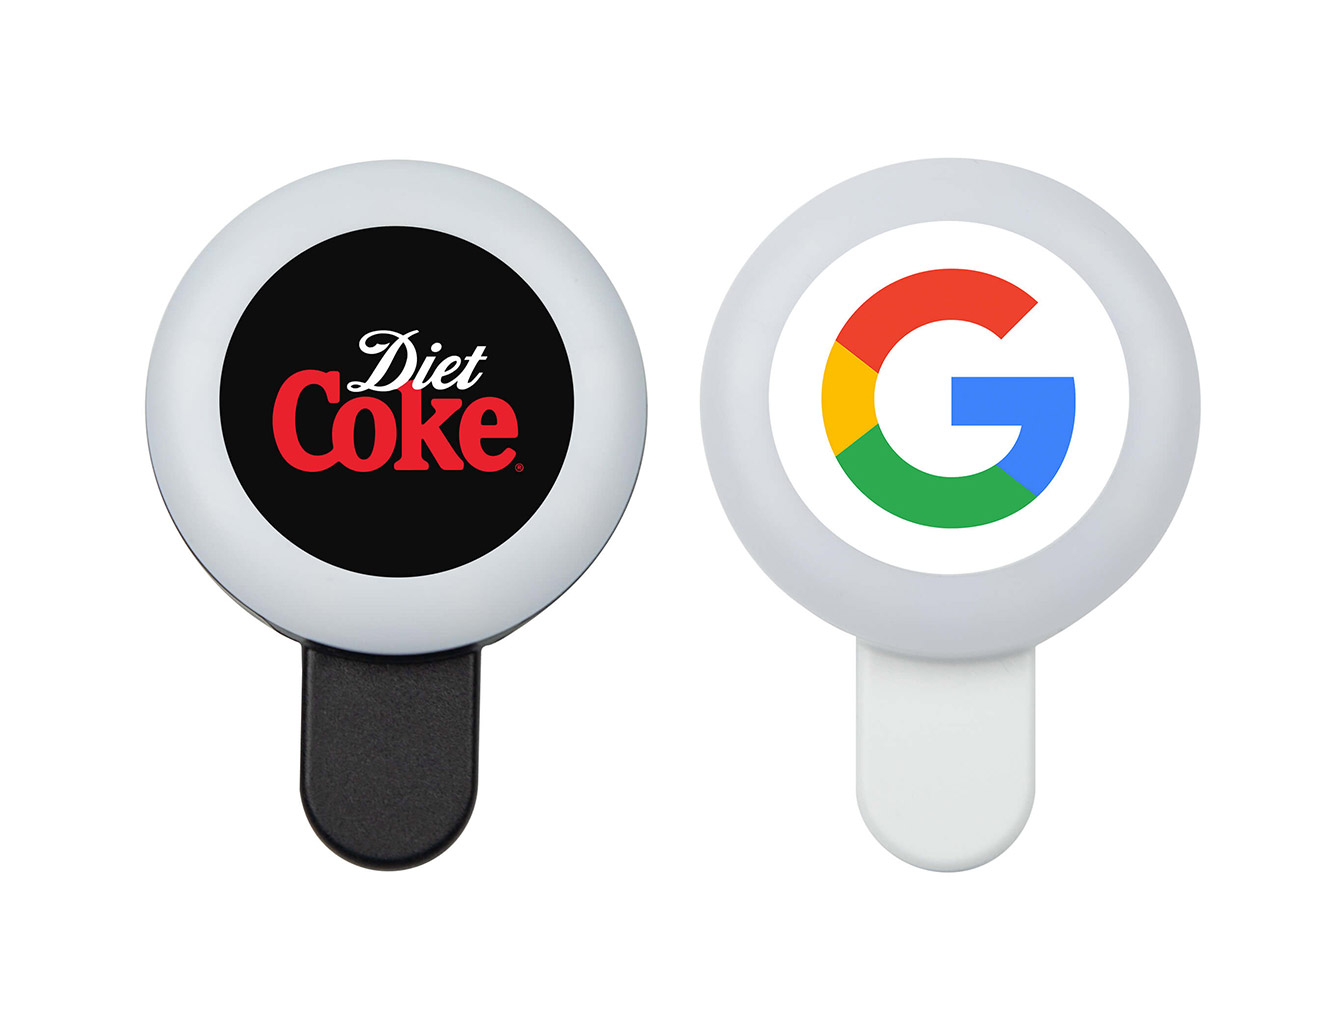 Promotional selfie ring lights for phones printed with diet coke and google logos in black and white